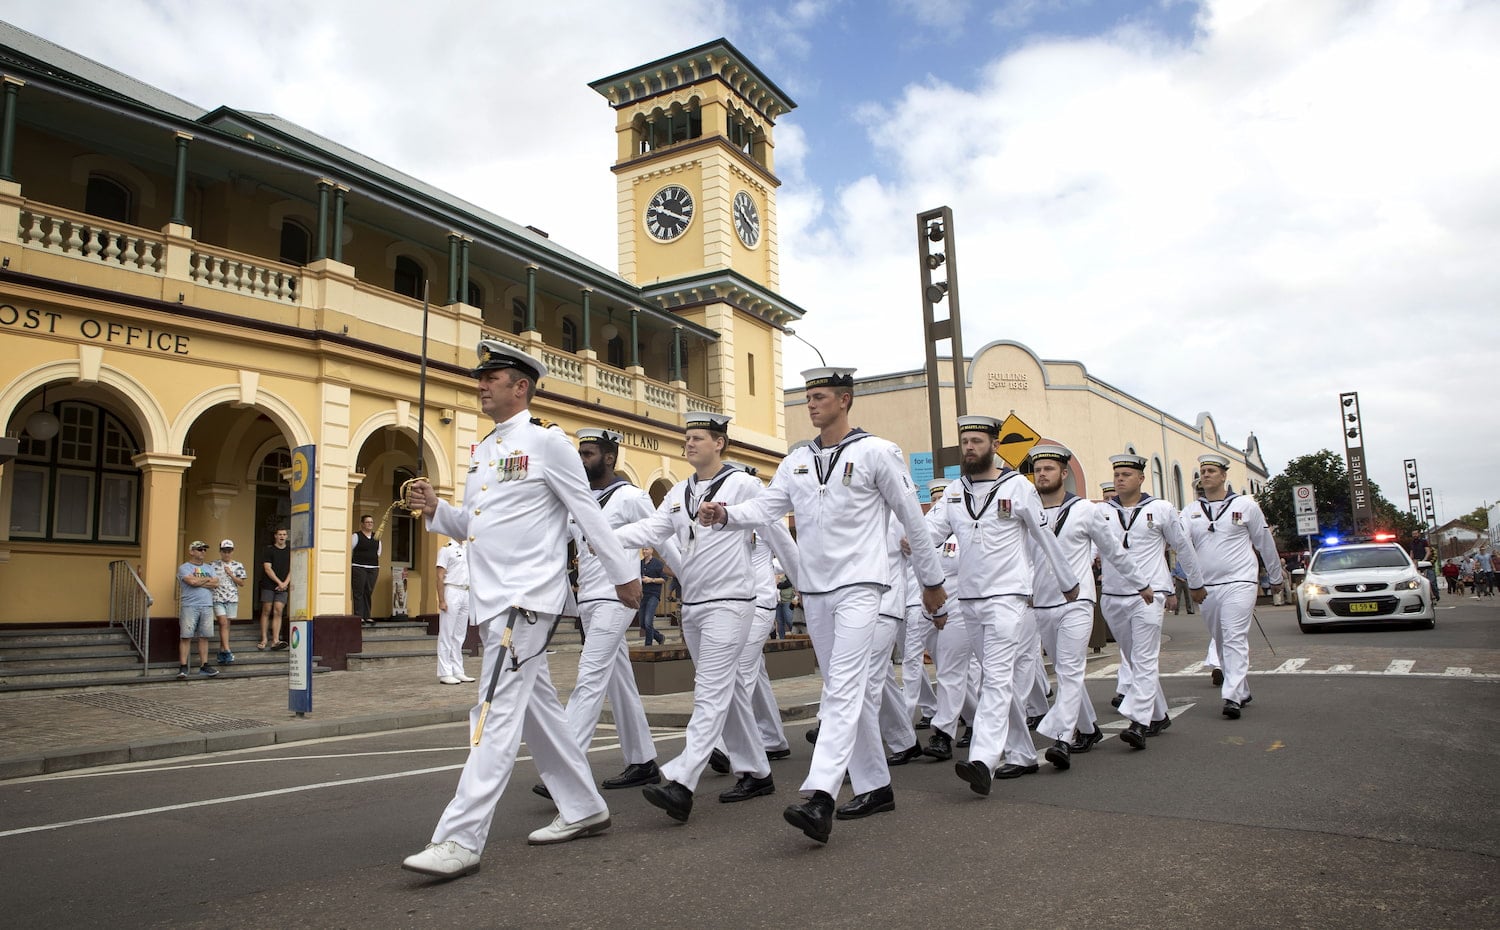 Navy officers marching through Maitland